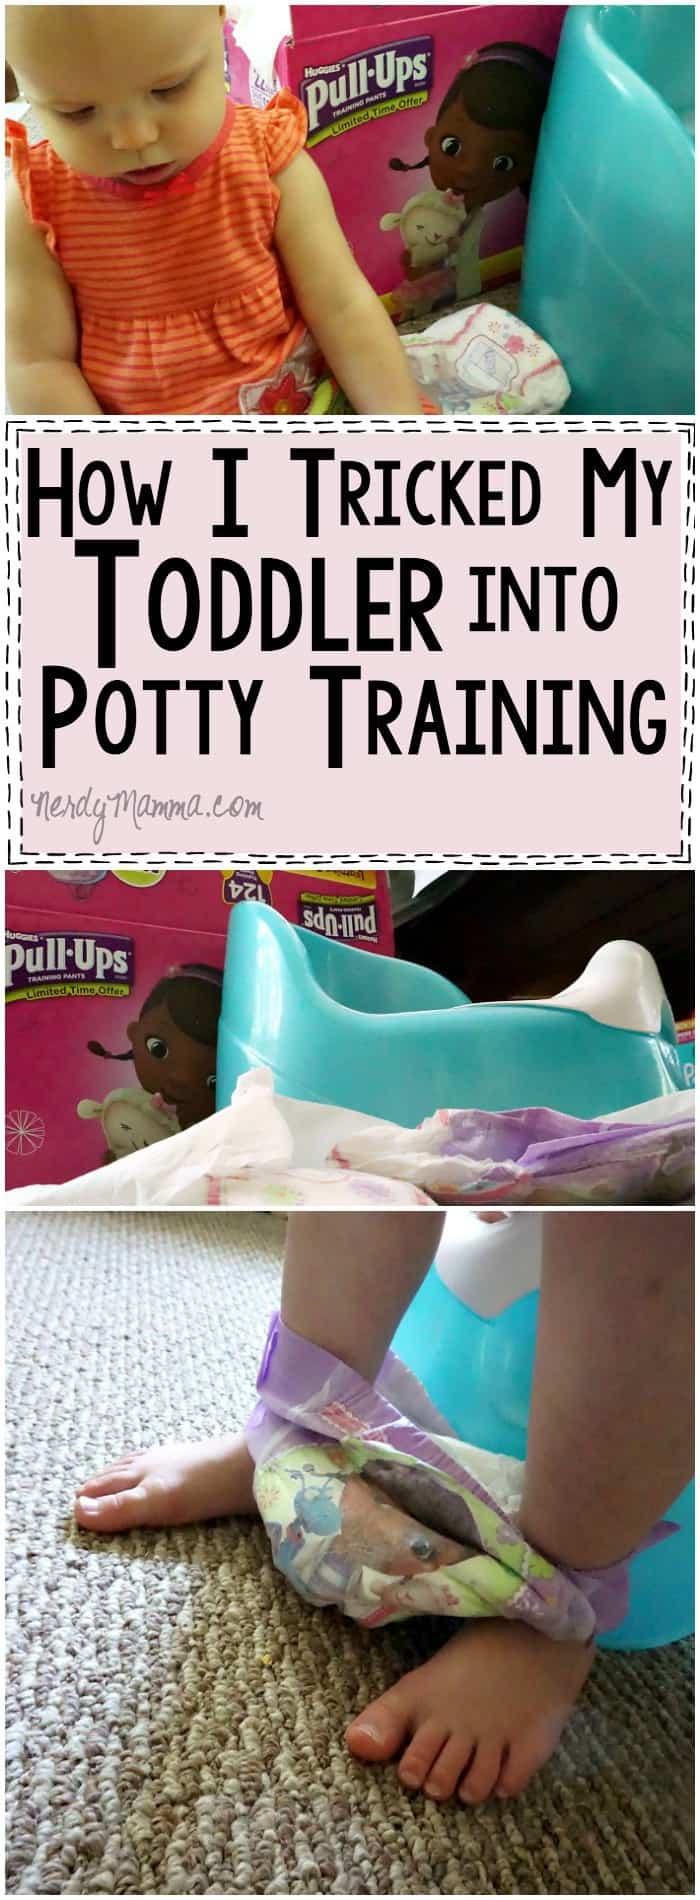 I love this mom's thoughts on how to trick your toddler into potty training--very funny. LOL!